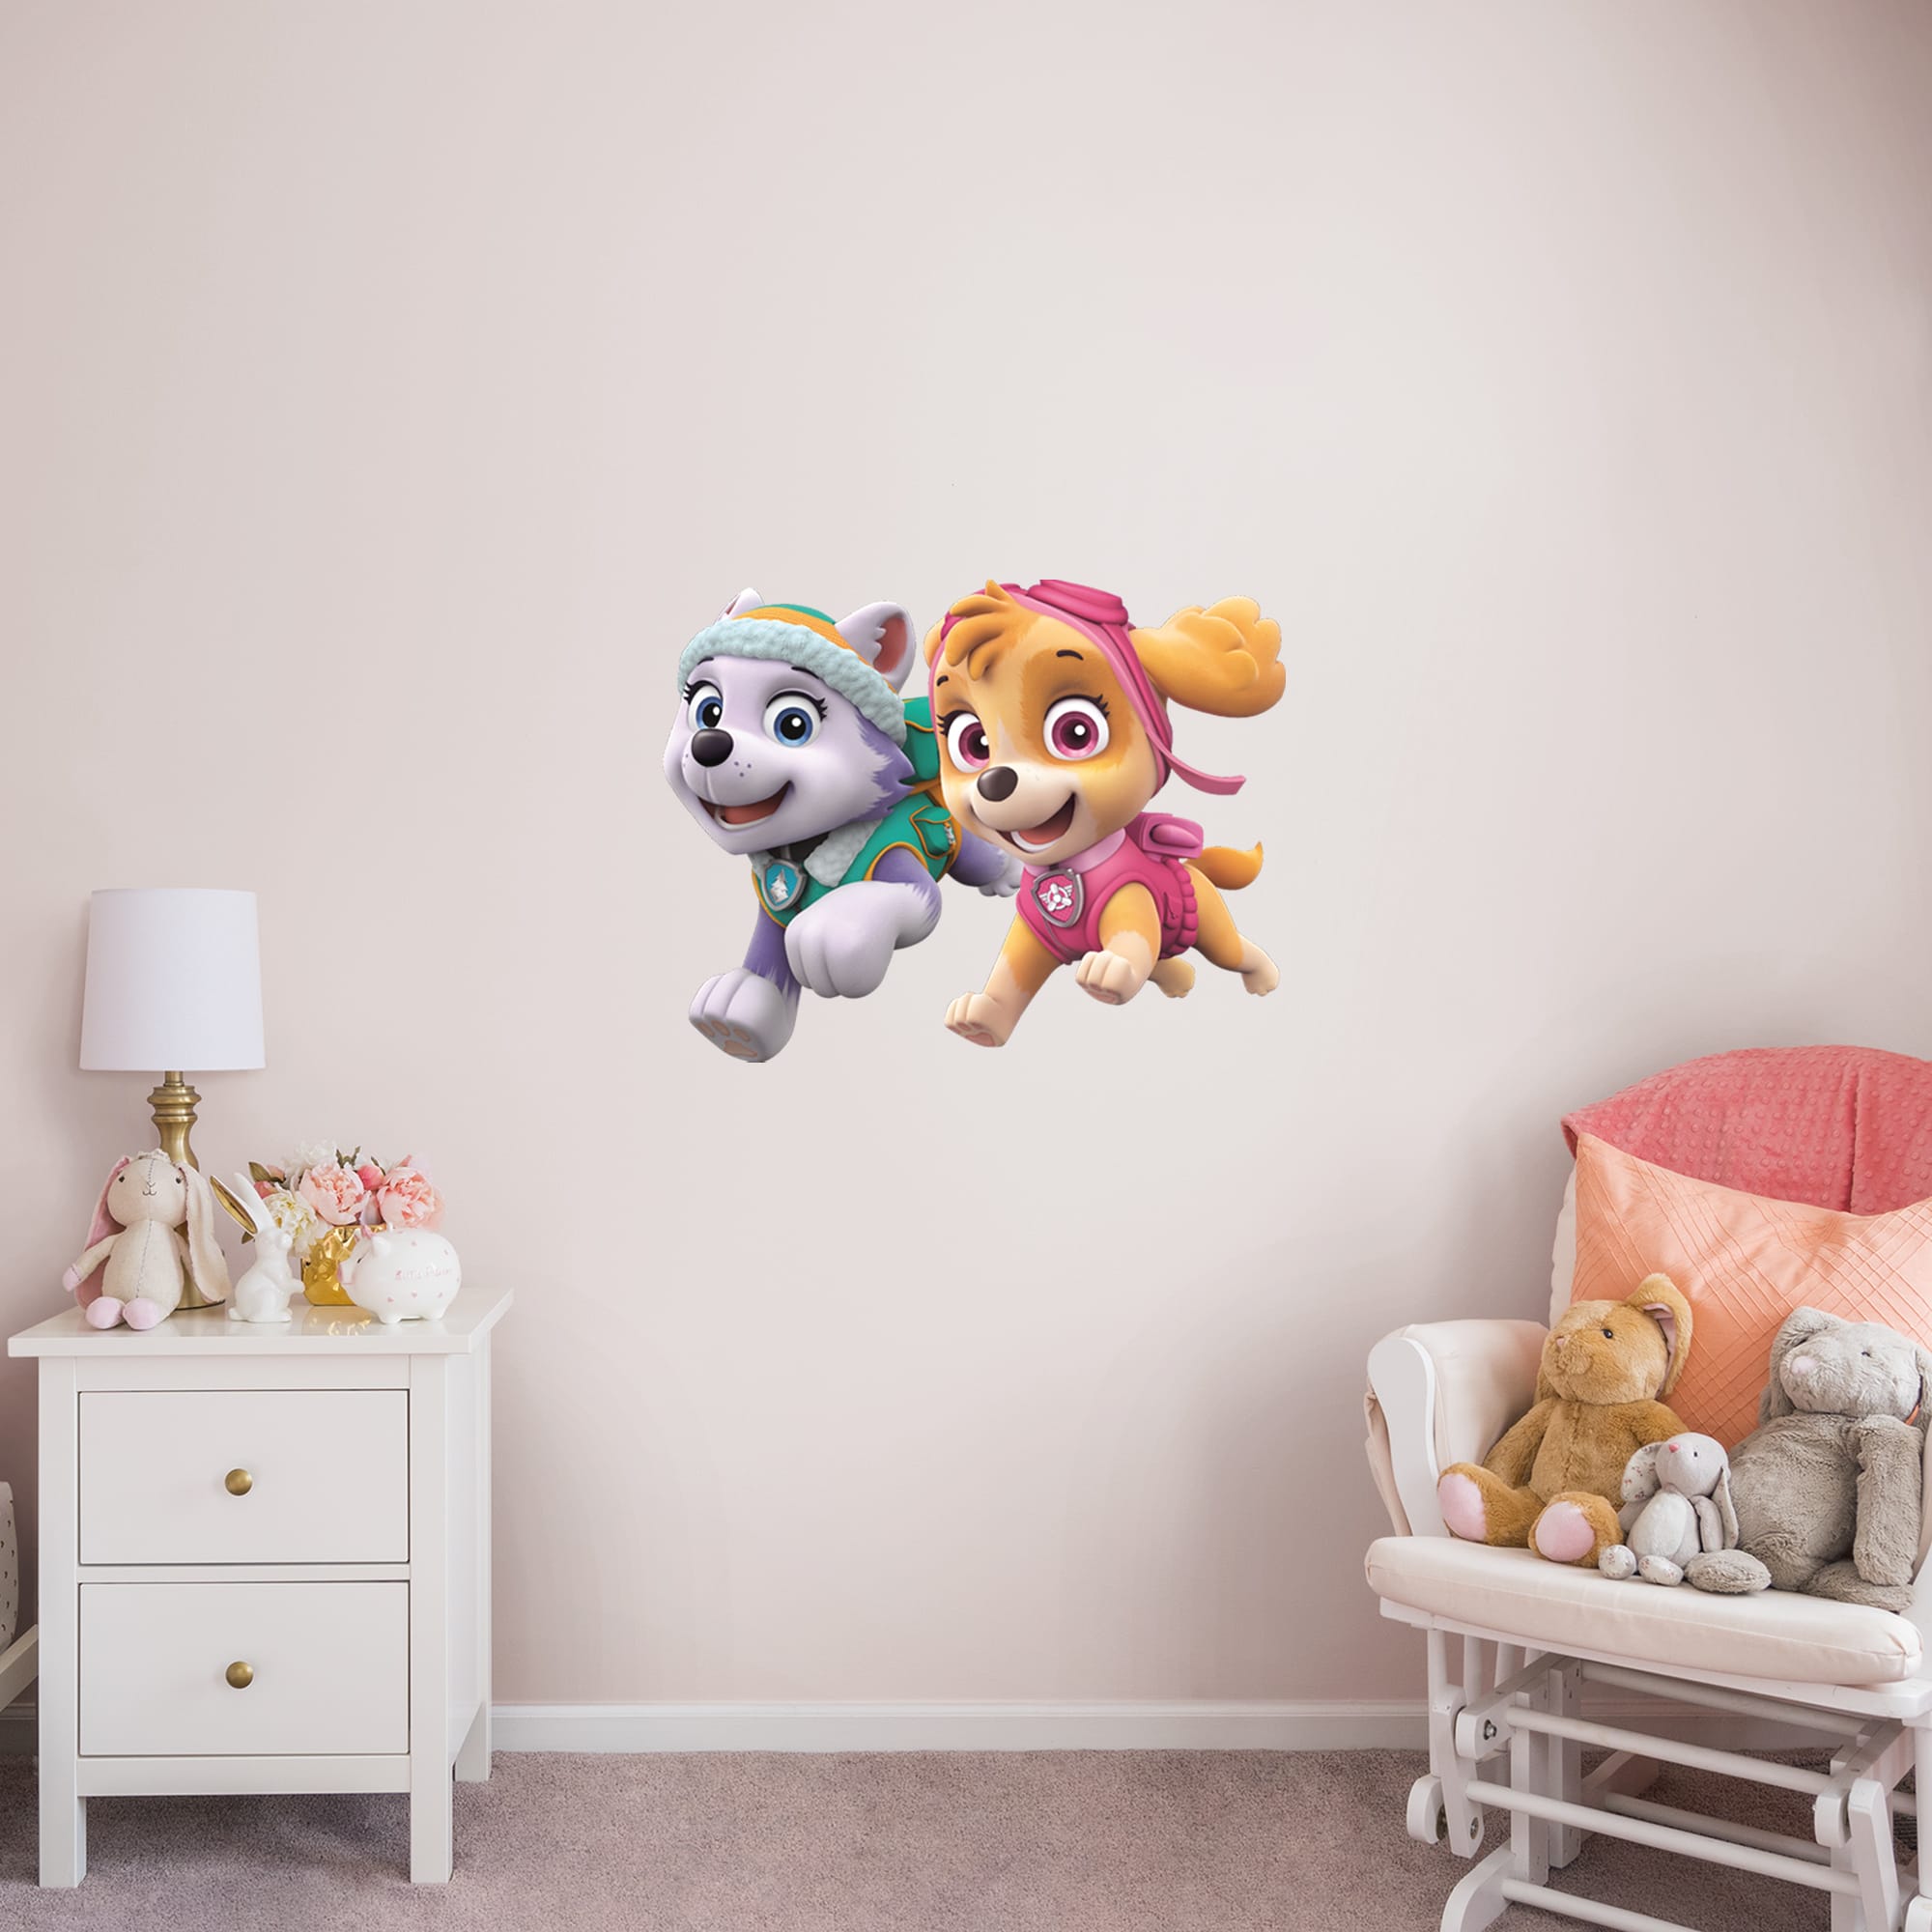 PAW Patrol: Girl Pups - Officially Licensed Removable Wall Decal XL by Fathead | Vinyl